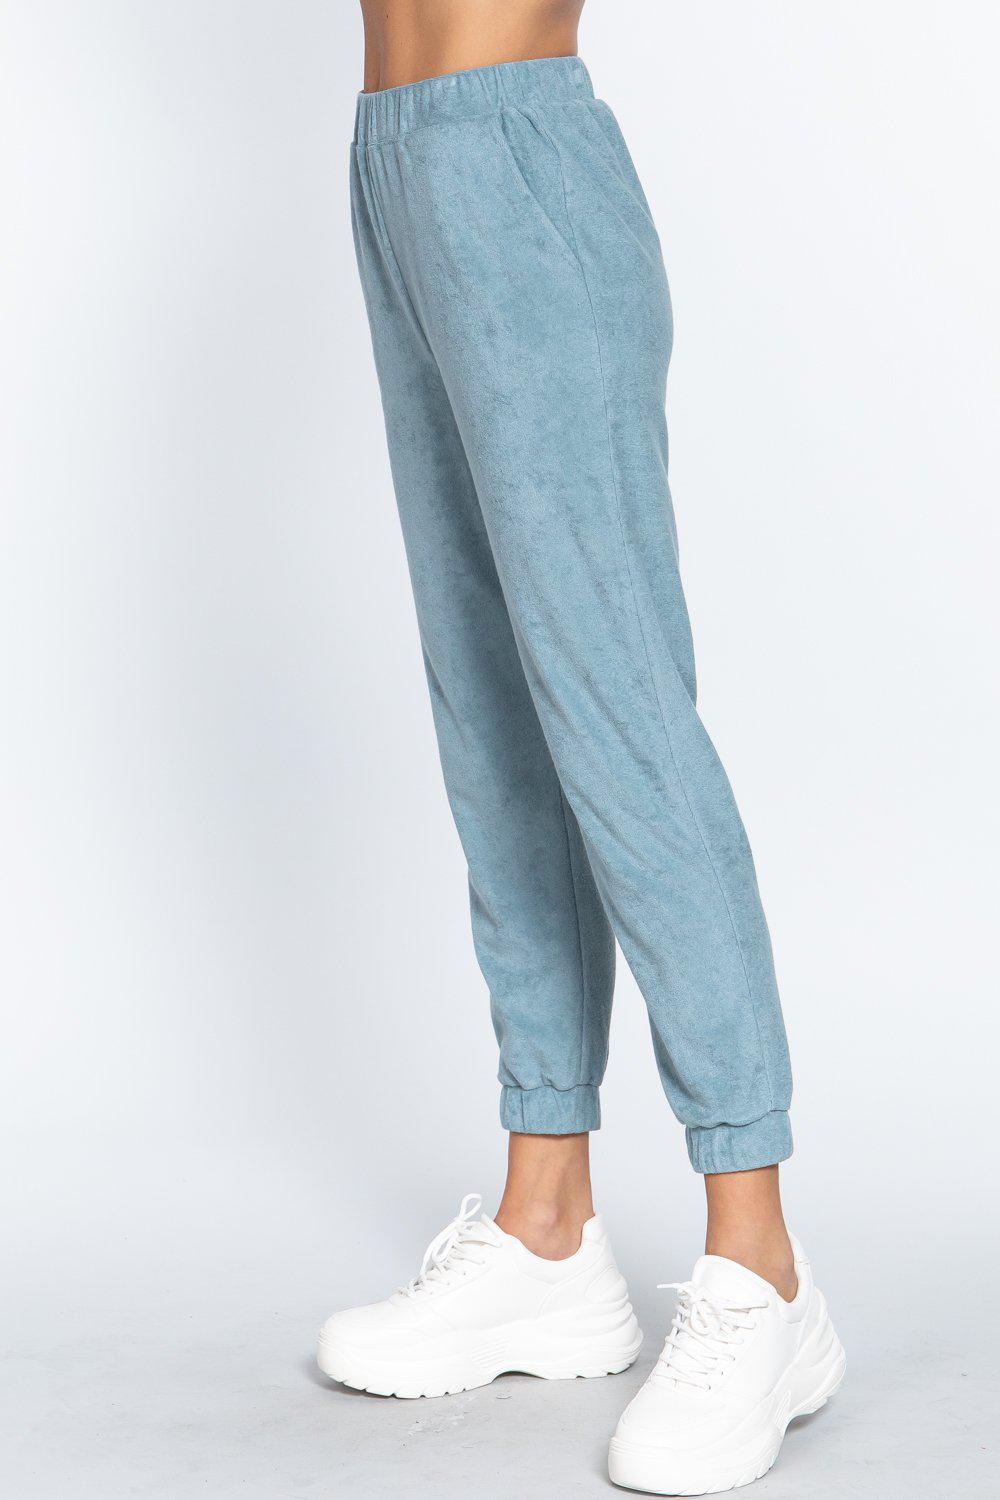 Terry Towelling Long Jogger Pants-[Adult]-[Female]-Blue Zone Planet